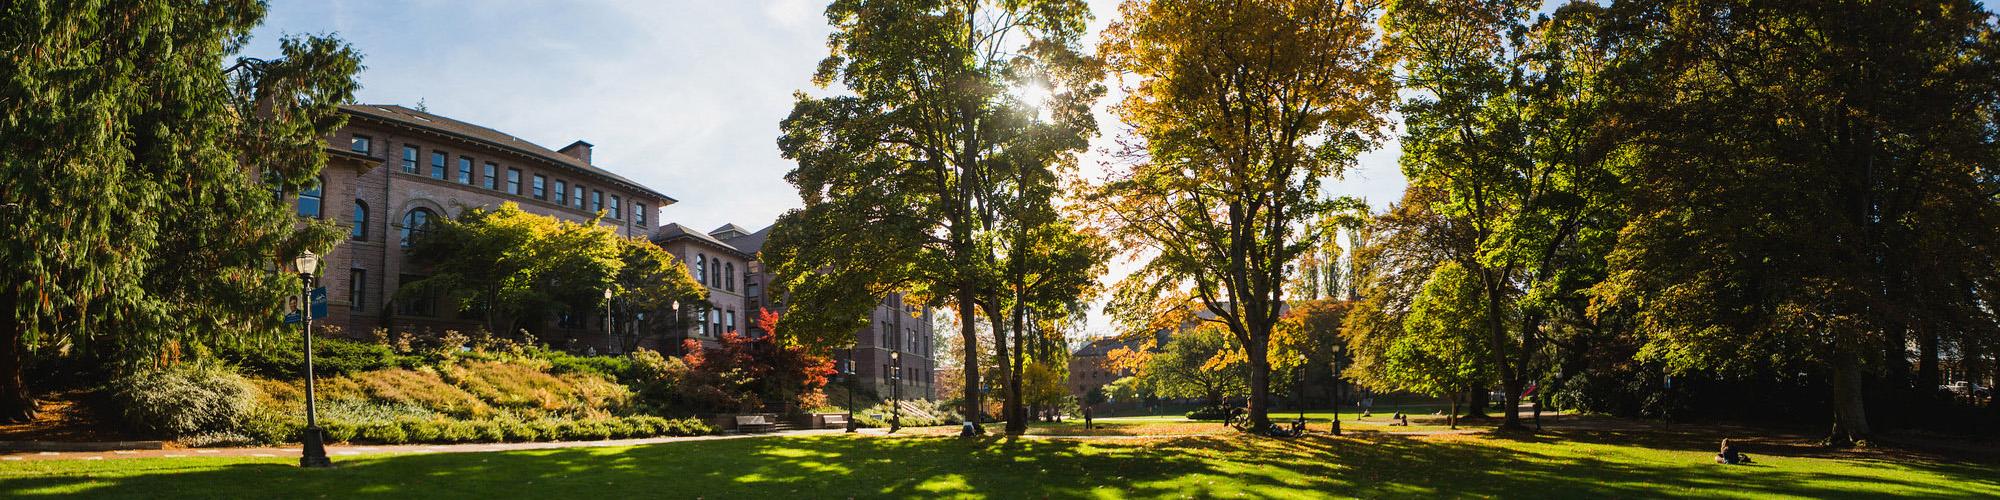 Lawn in front of Old Main during summer with sun shining through trees